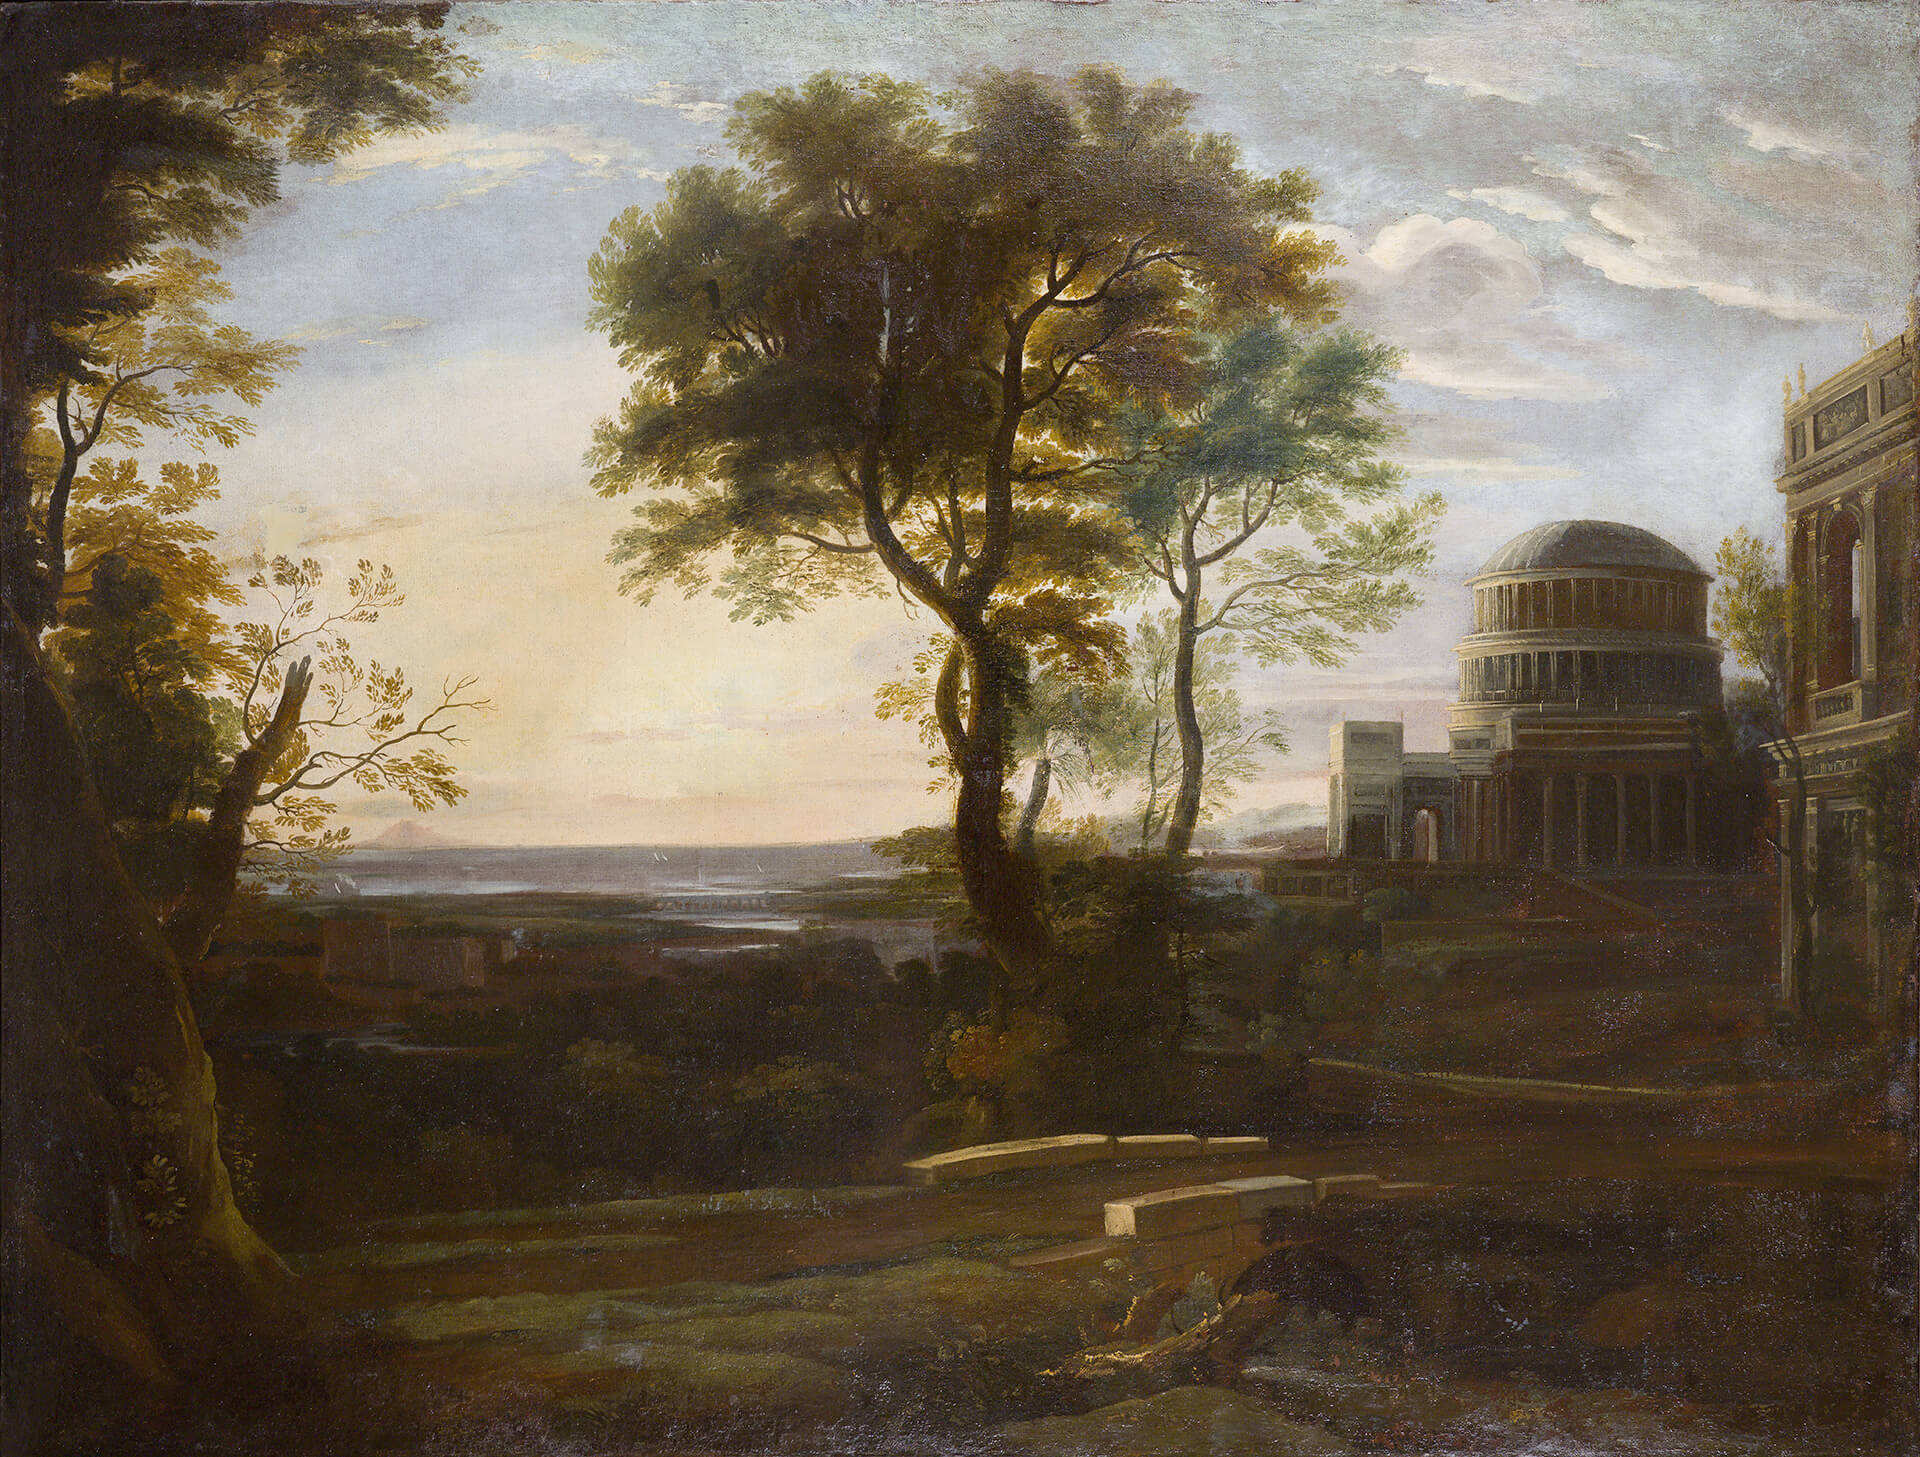 Roman Landscape with figures and a small town in the background